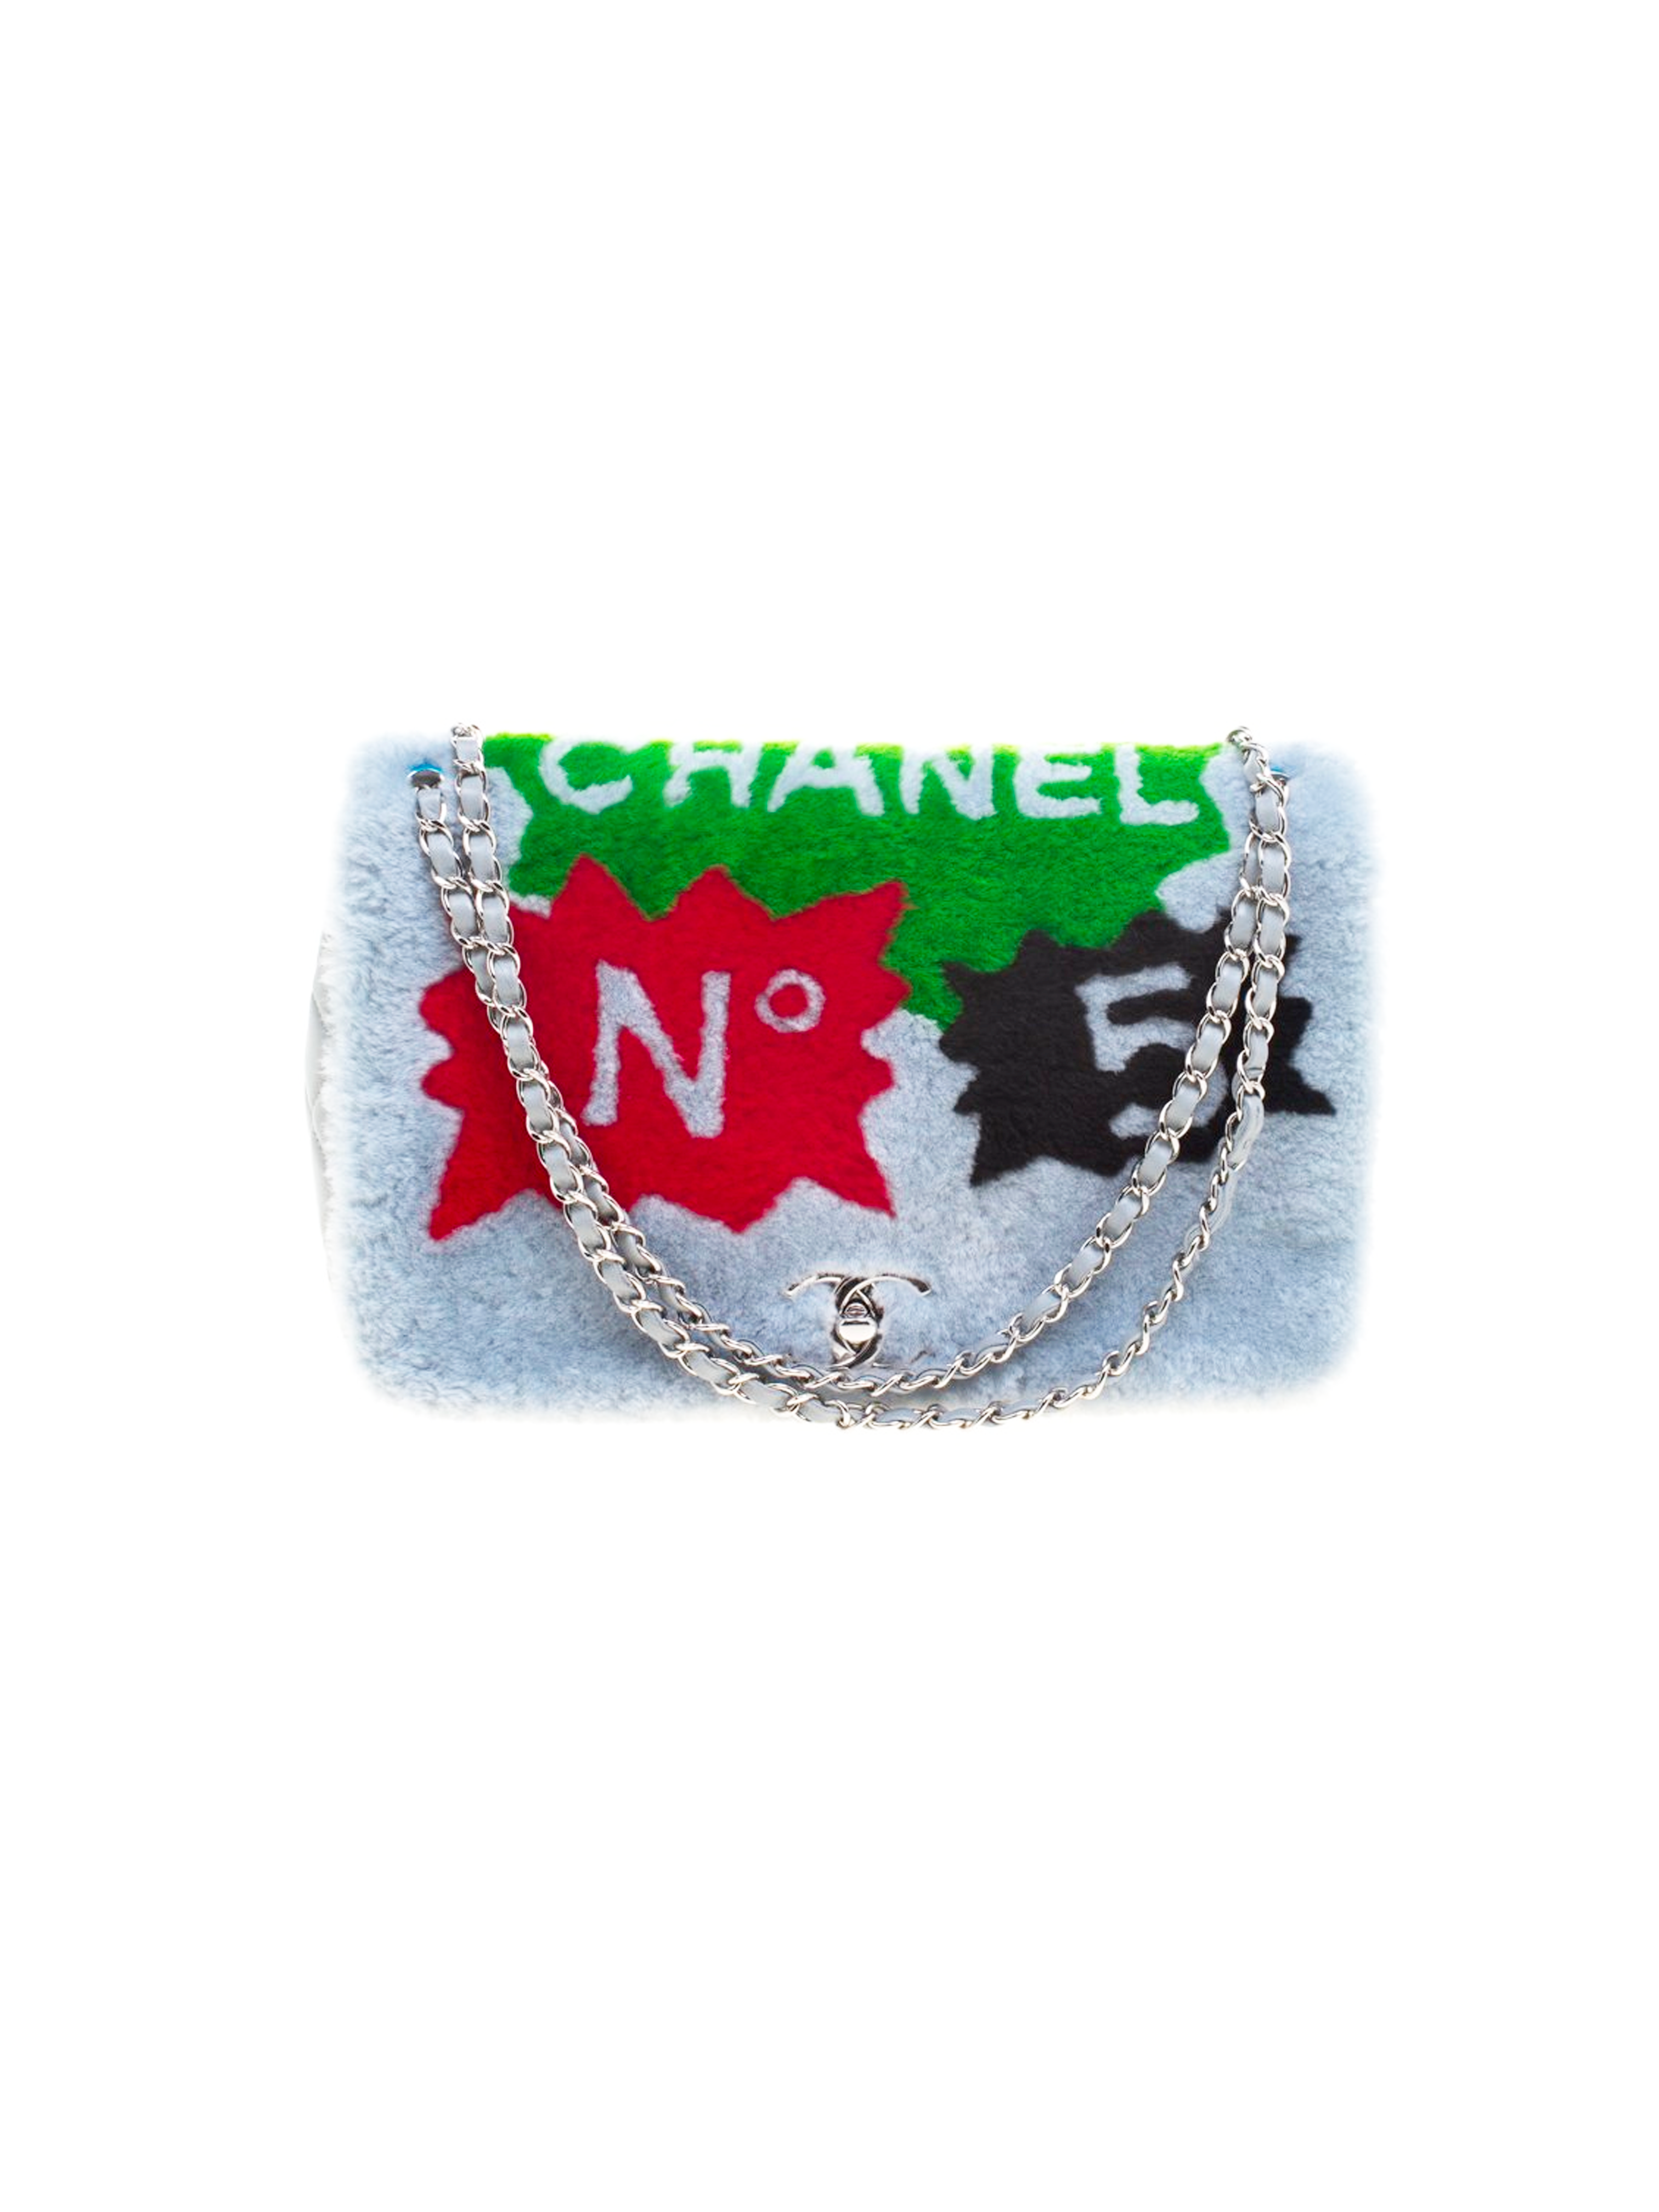 Chanel X-Large Art Piece For Display Only Hula Hoop Runway Bag Limited, 2013